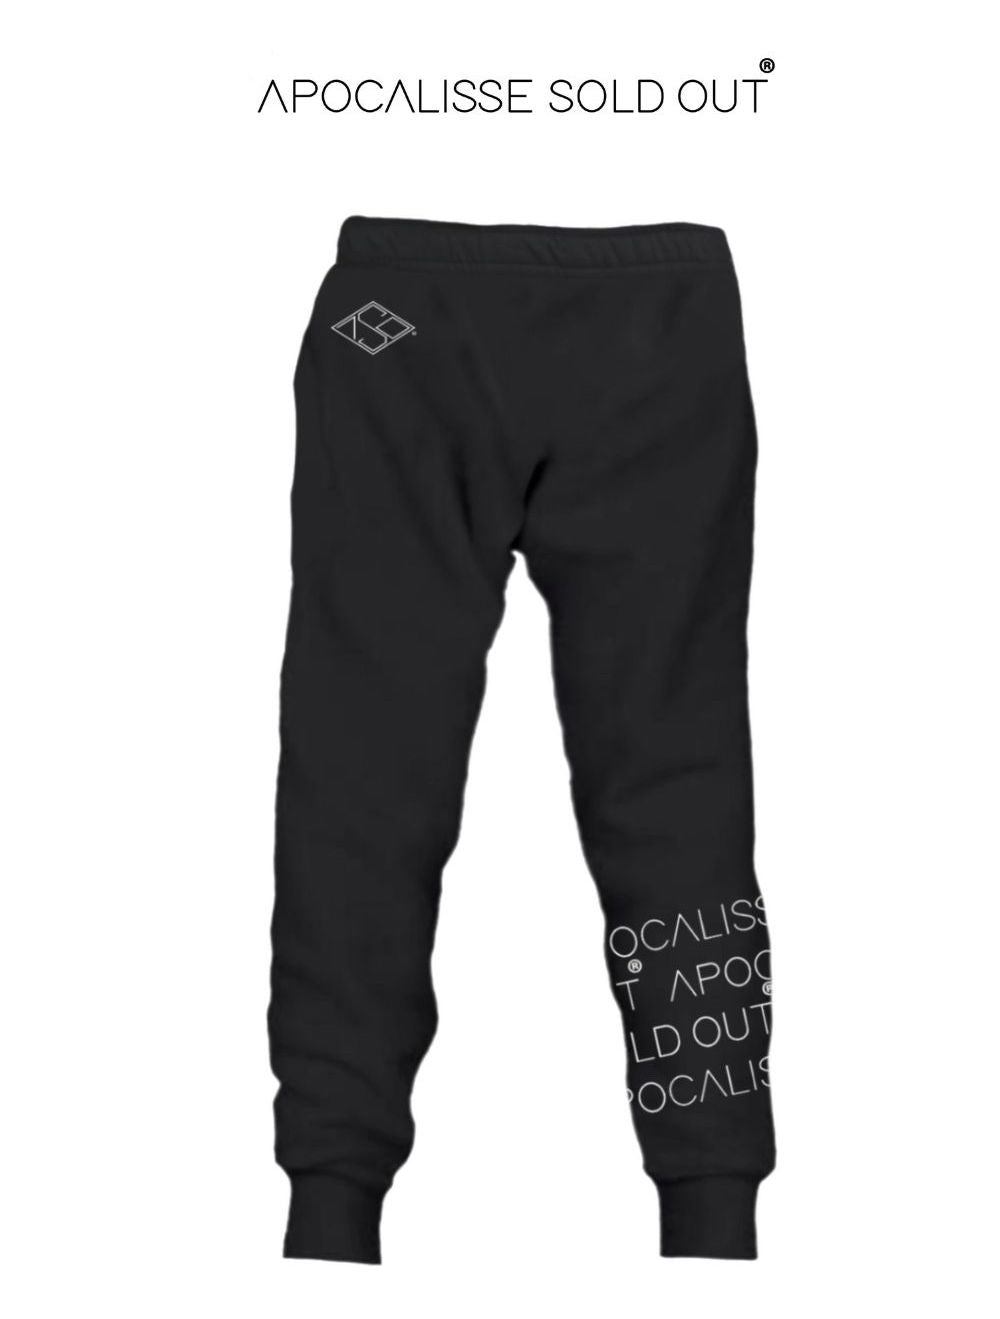 SuitPants BLACK by ApocalisseSoldOut® Fashion Brand